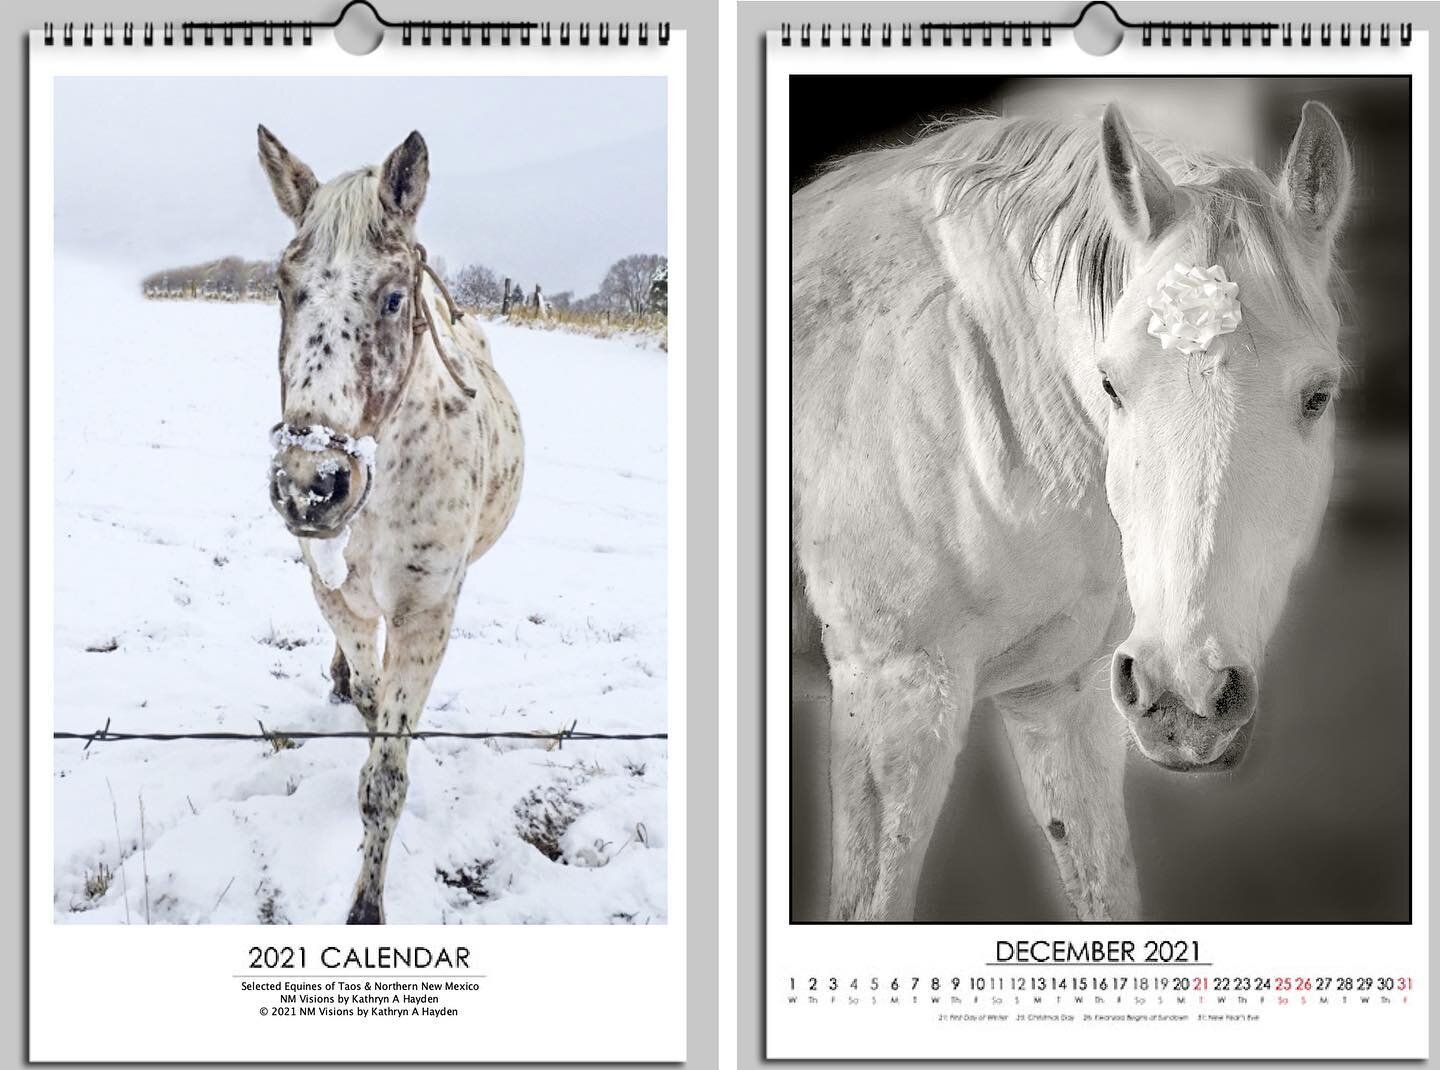 2021 Equines of Northern New Mexico Calendar now on sale.
13 images of the moody, funny and unique equines. Photographing these beautiful creatures is one of my favorite subjects to capture as they each display their unique personalities. Grab one (o